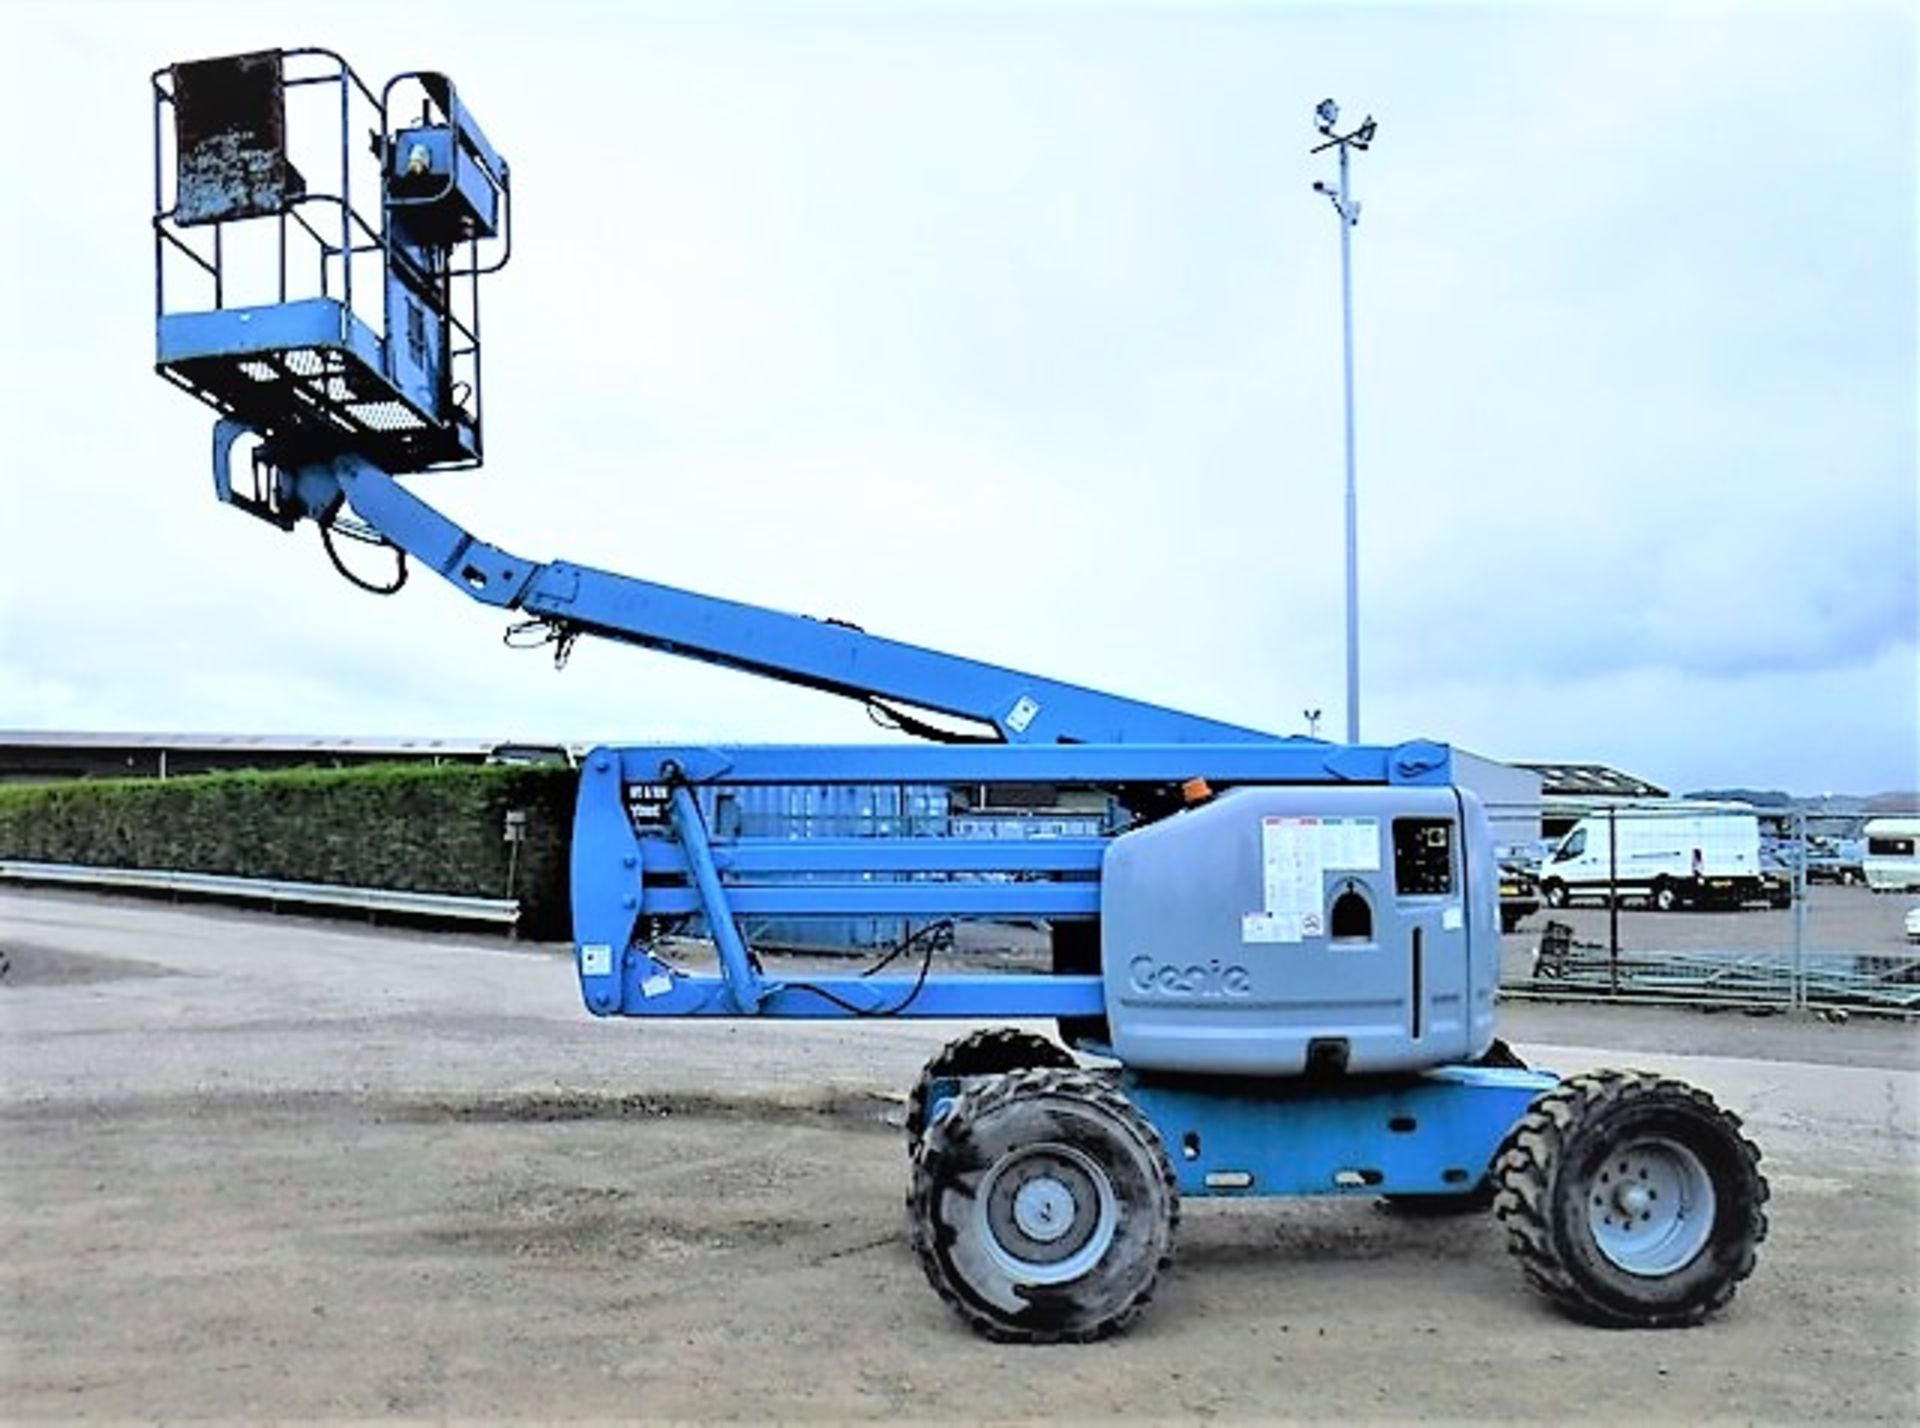 2000 GENIE BOOM LIFT Z45.25. S/N 15155. 8050.5hrs (not verified). Max working height 15.8m, outreach